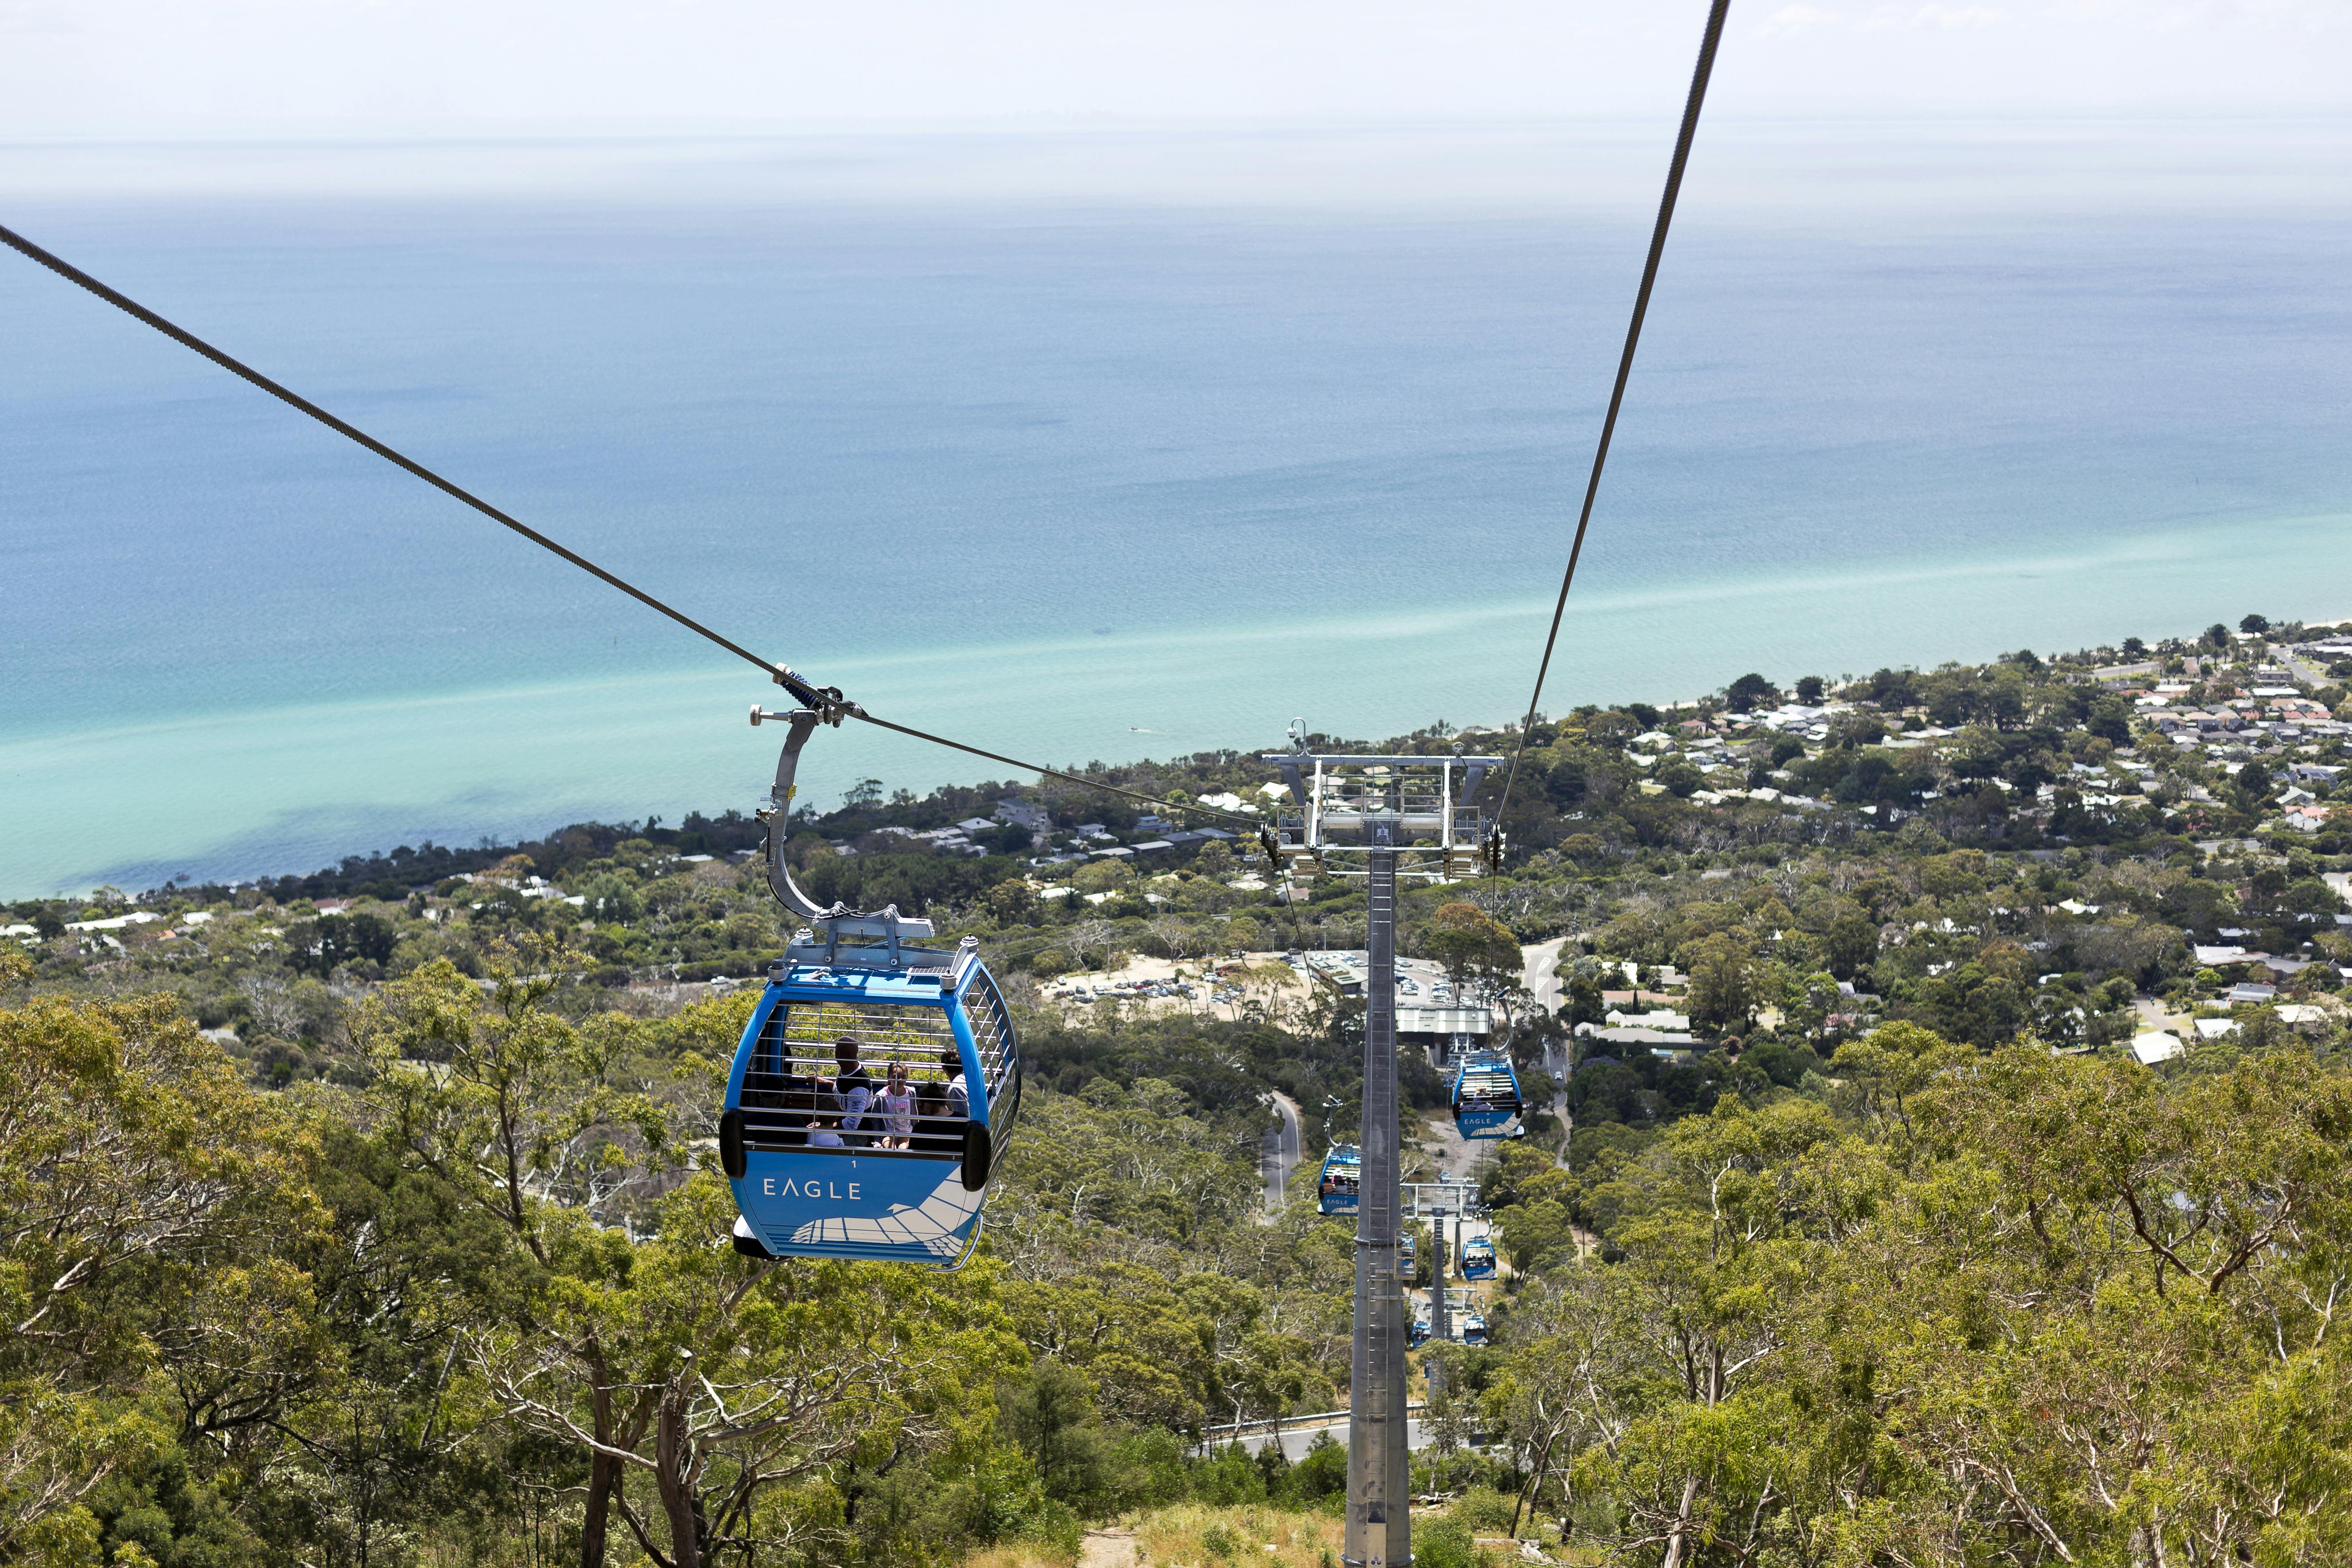 Mornington Peninsula scenic bus tour including chairlift, lunch, choc tasting and more